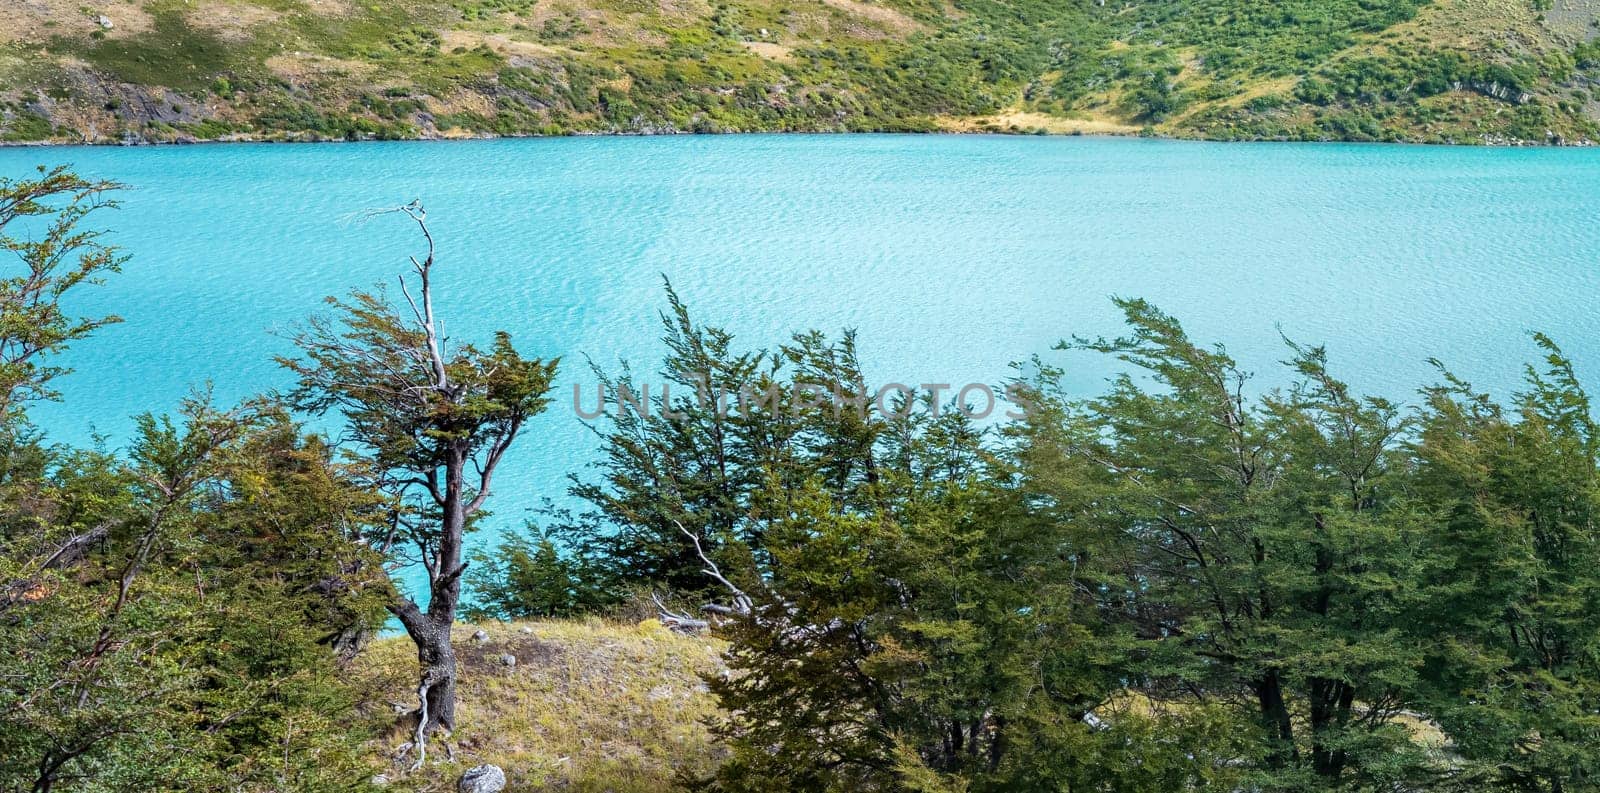 Serene landscape with a bright blue lake surrounded by lush greenery.